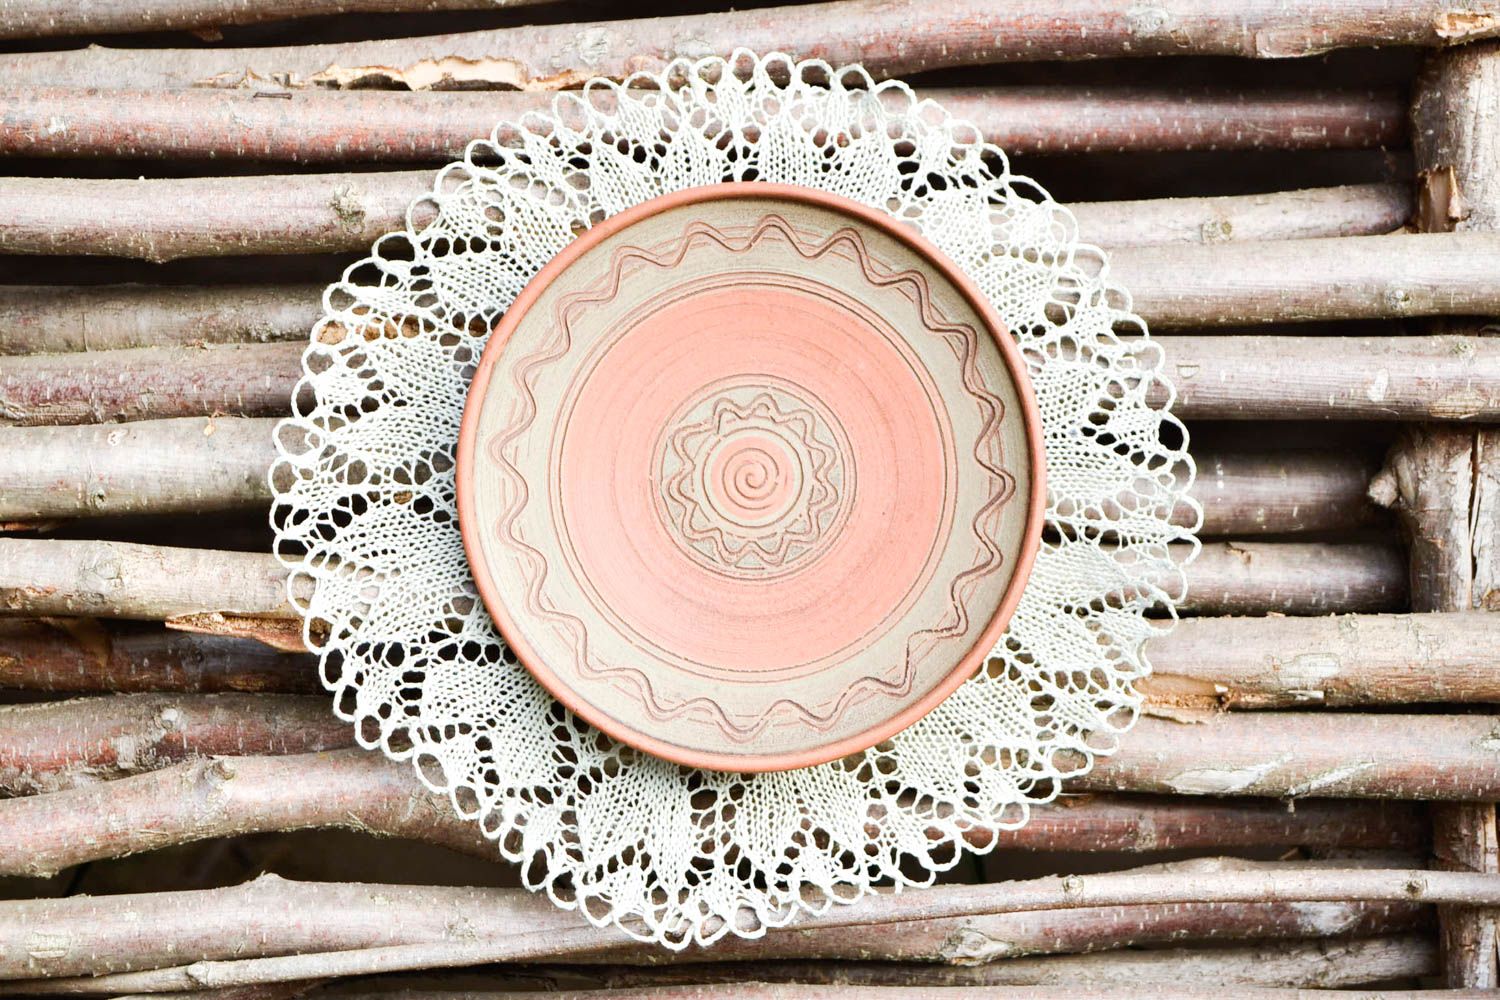 Decorative plate handmade ceramic plate for decorative use only wall hanging photo 1